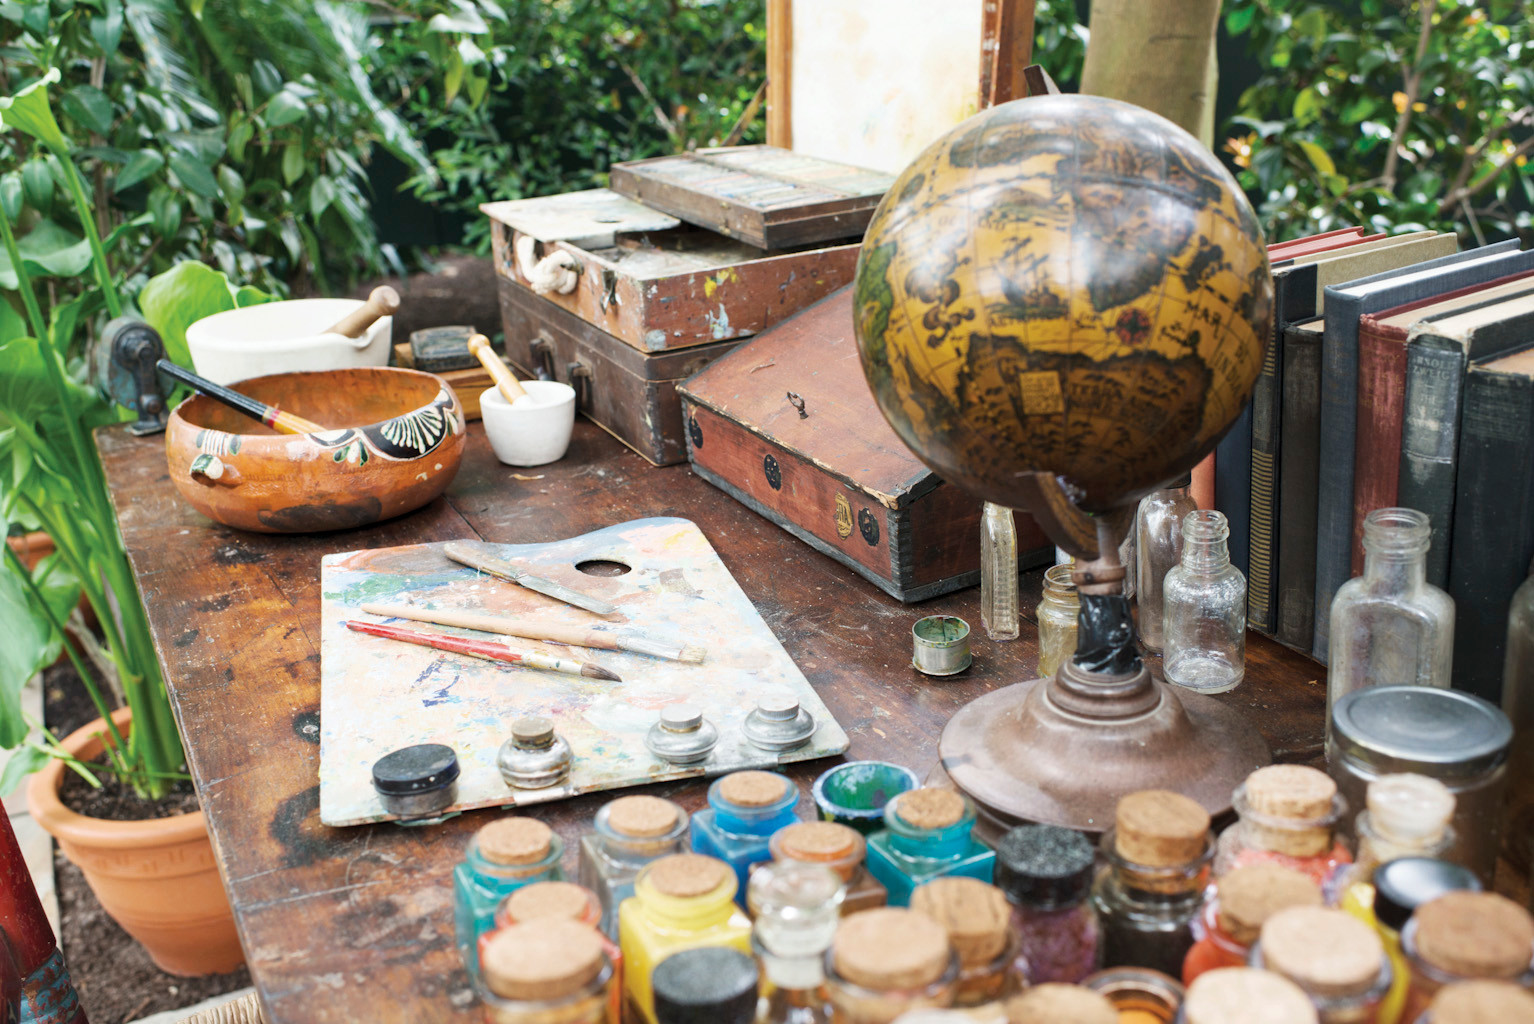 A 're-imagining' of Frida Kahlo's work desk and painting tools.